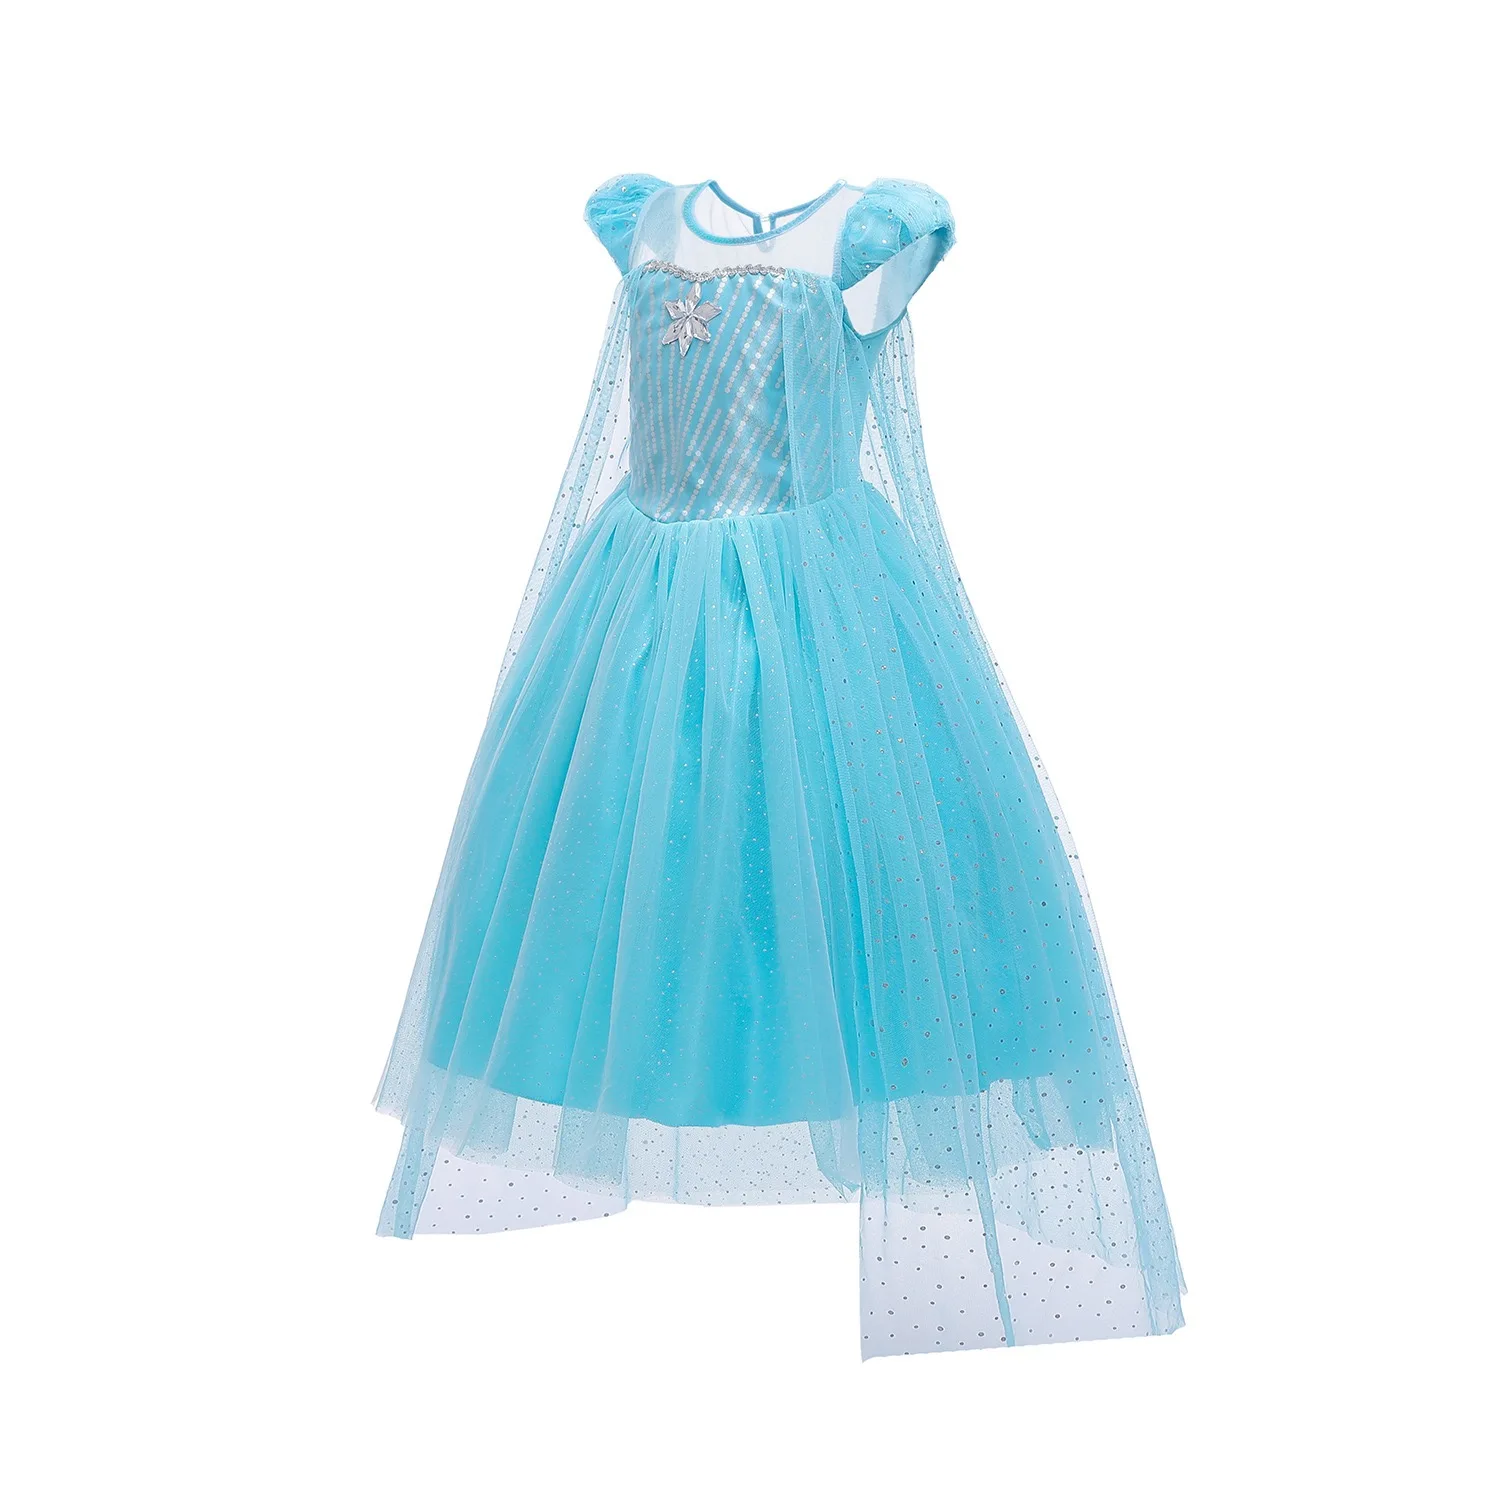 

TV&Movie Elsa Anna Princess Dress Cosplay Birthday Party Fancy Girls Costume for Kids Clothing